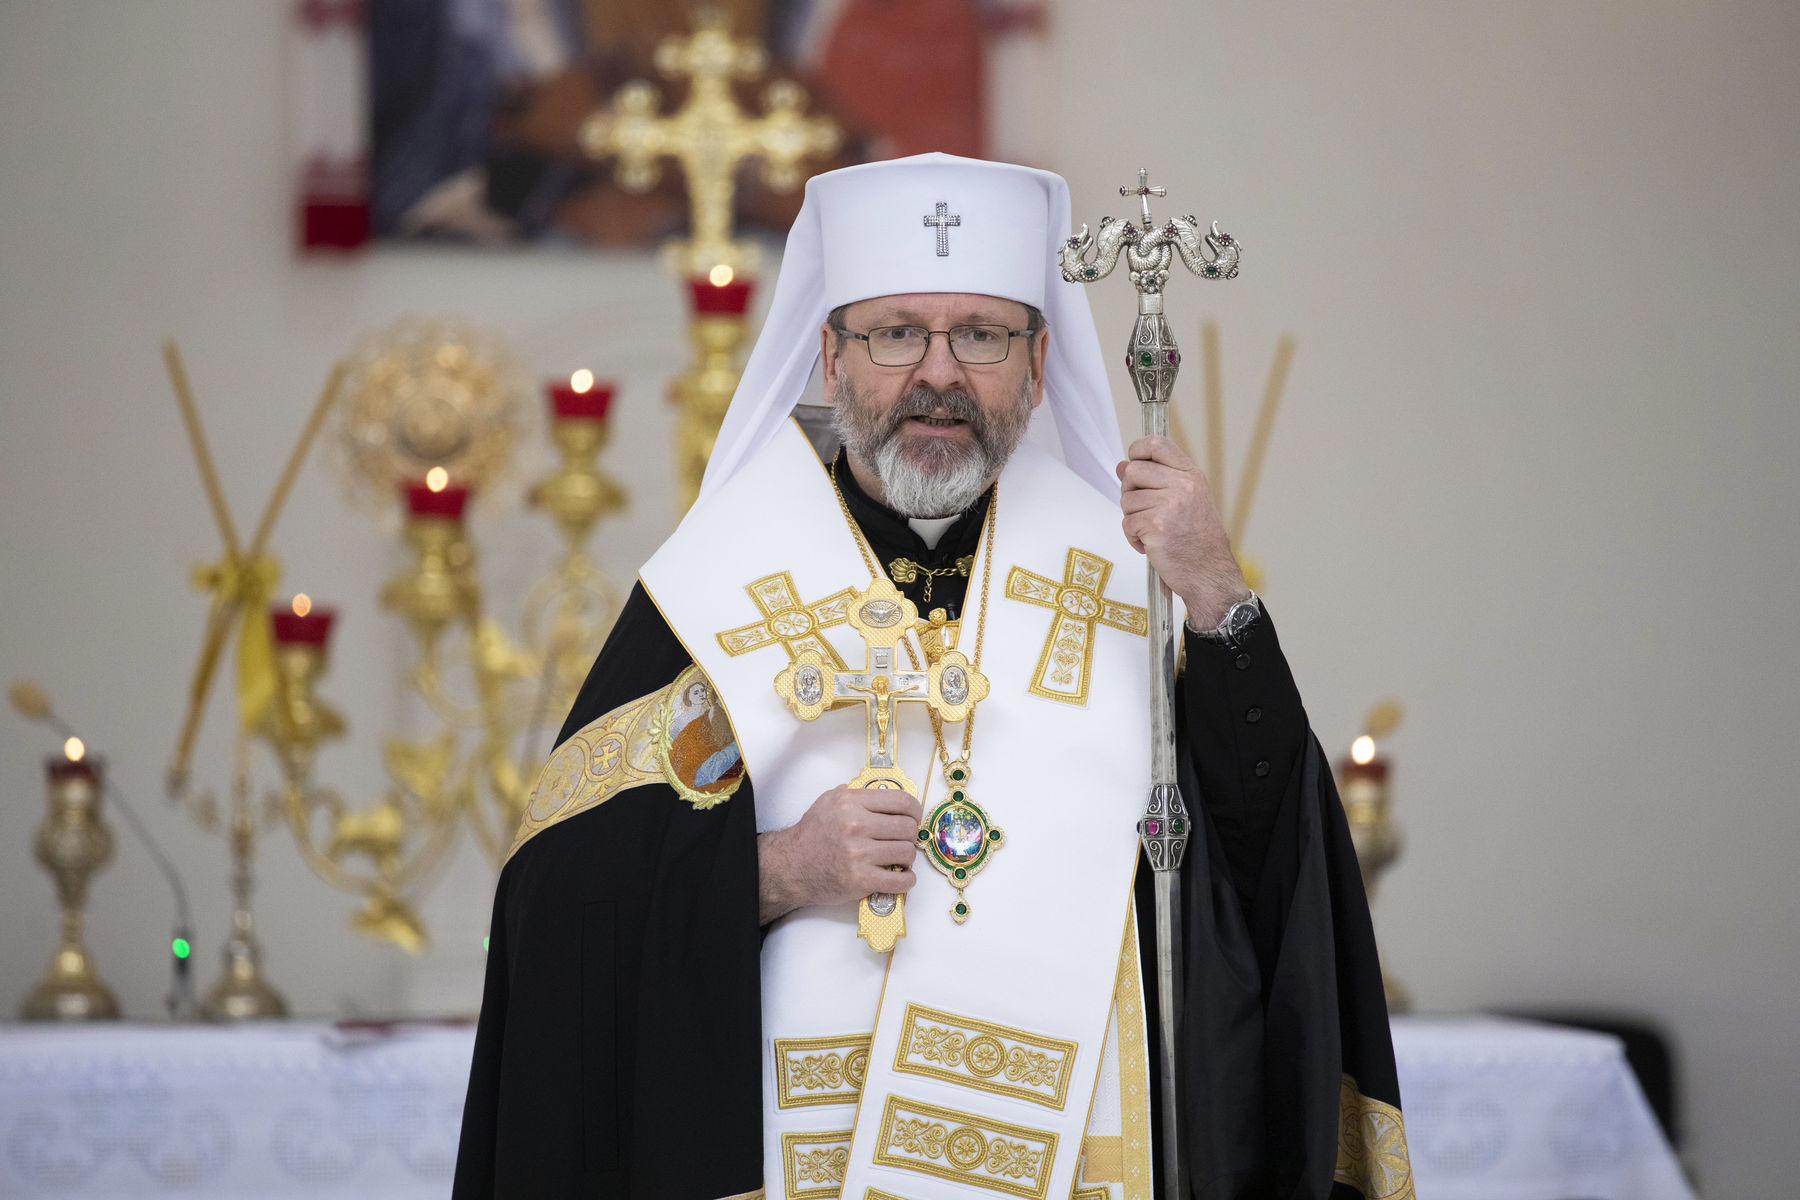 Sermon of His Beatitude Sviatoslav during the Prayer for Victory and Just Peace in Ukraine